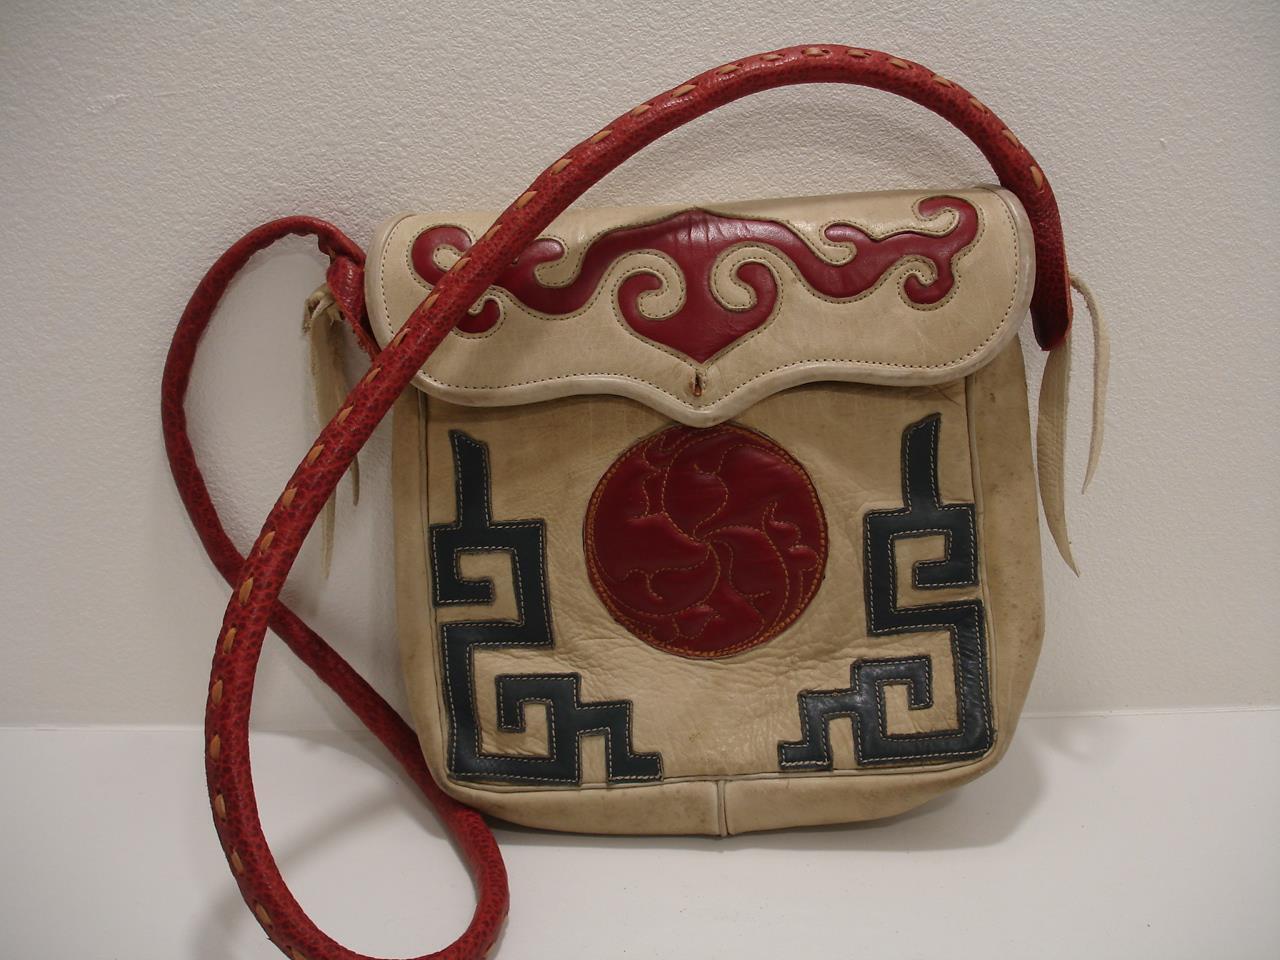 Vtg Tribal Ethnic Mongolian Applique Leather Crossbody Bag Purse Tote Flap Red